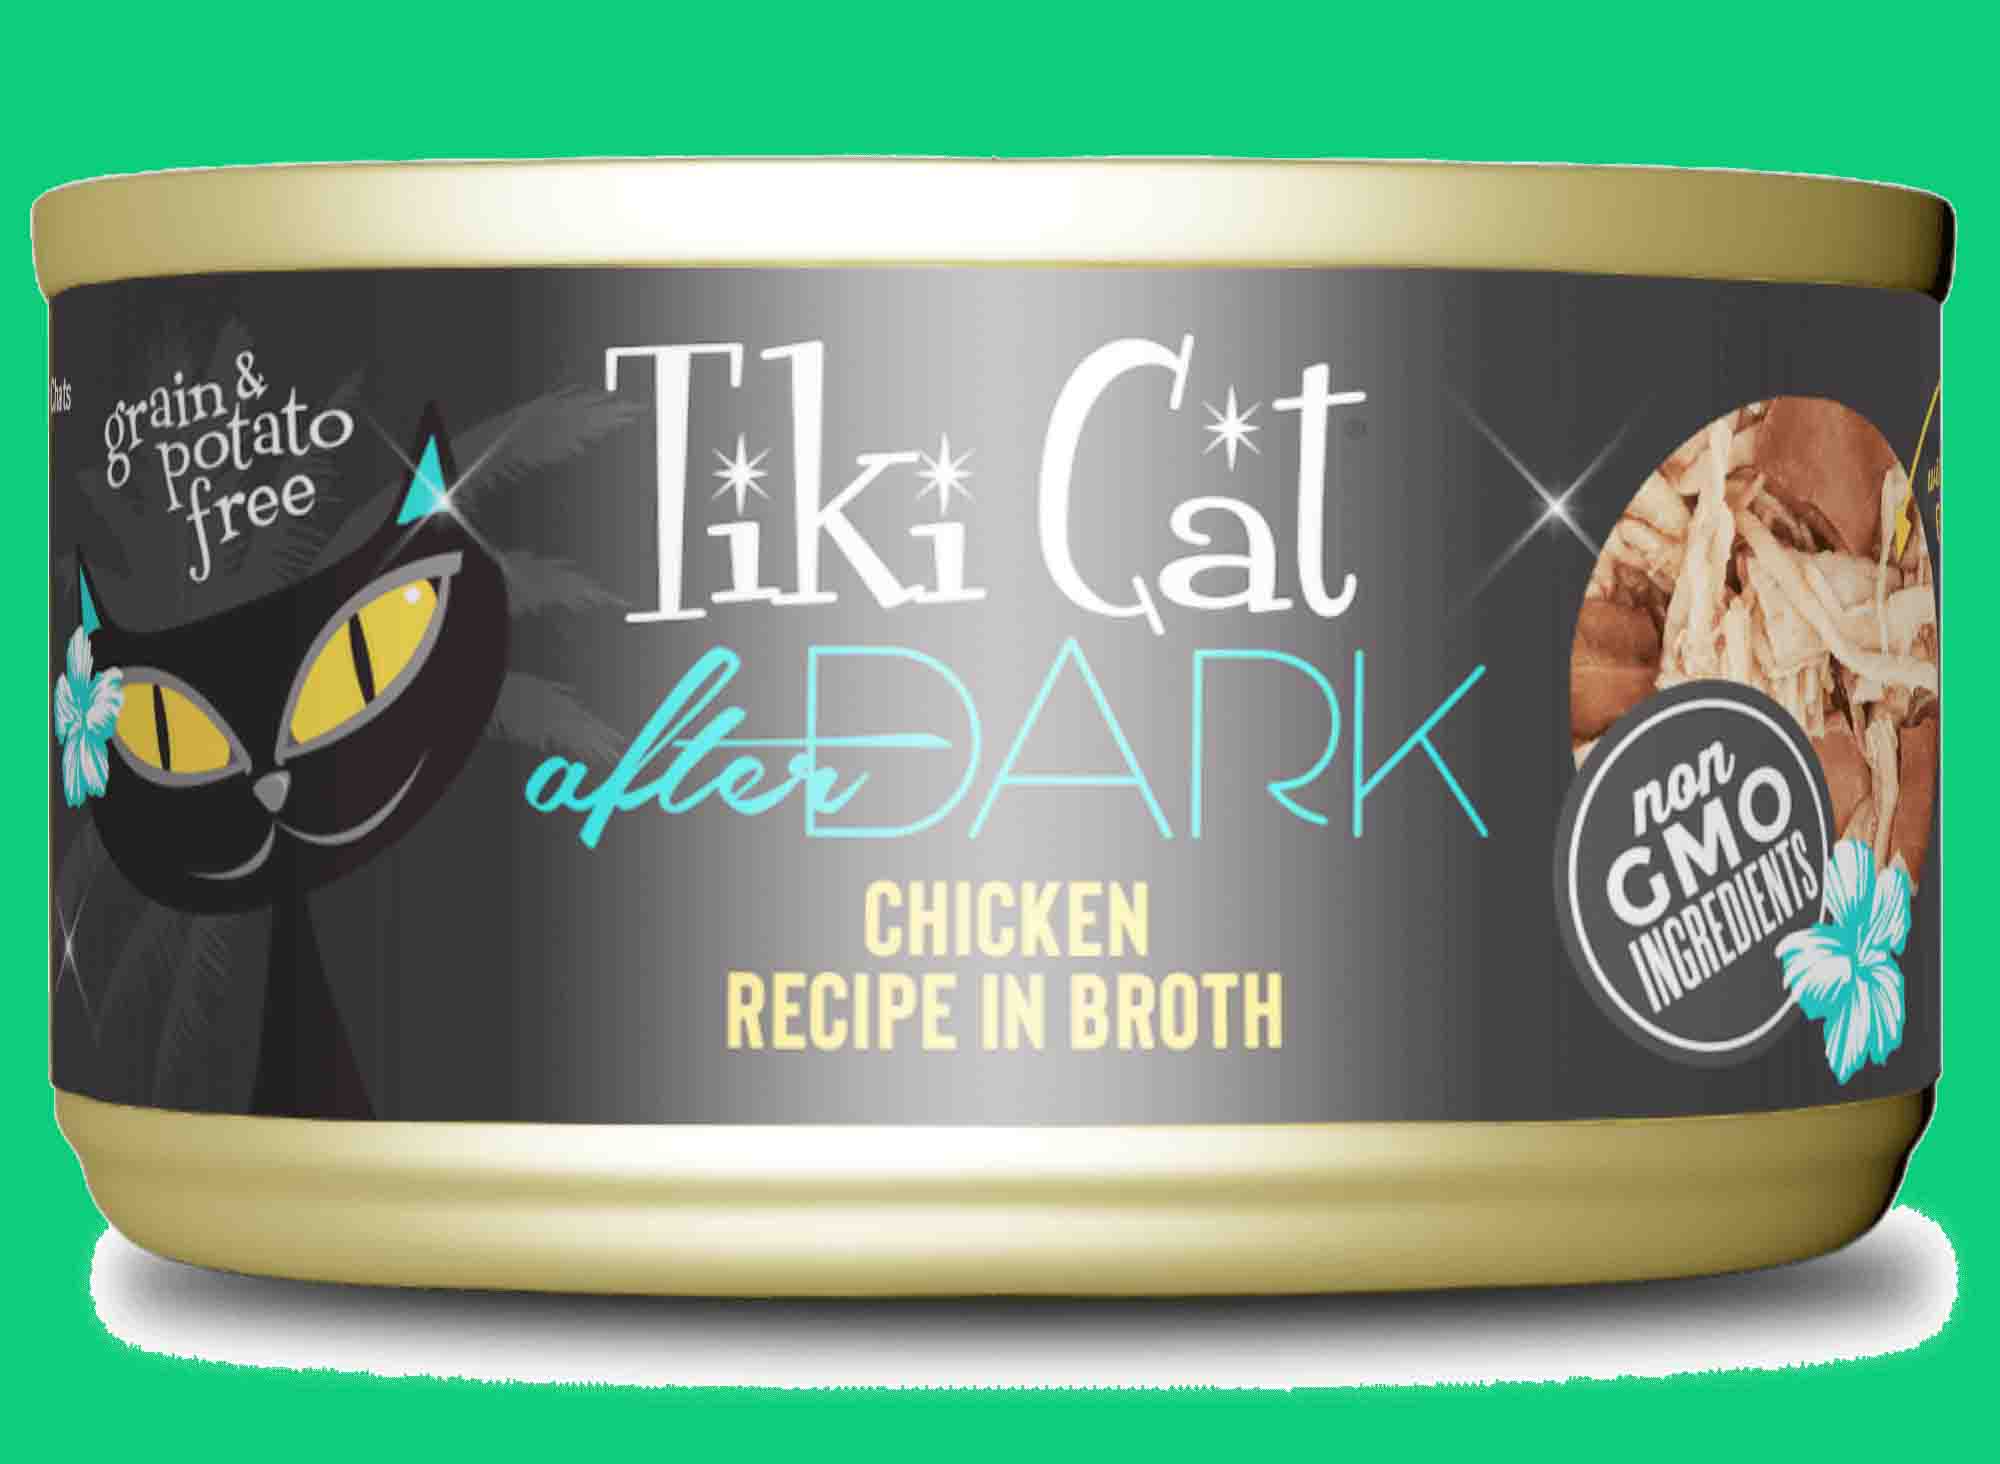 Is Tiki Cat Food Healthy Tiki Cat food is a popular brand of cat food that is known for its use of high-quality, natural ingredients. It is de-signed to pro-vide cats with a com-plete and ba